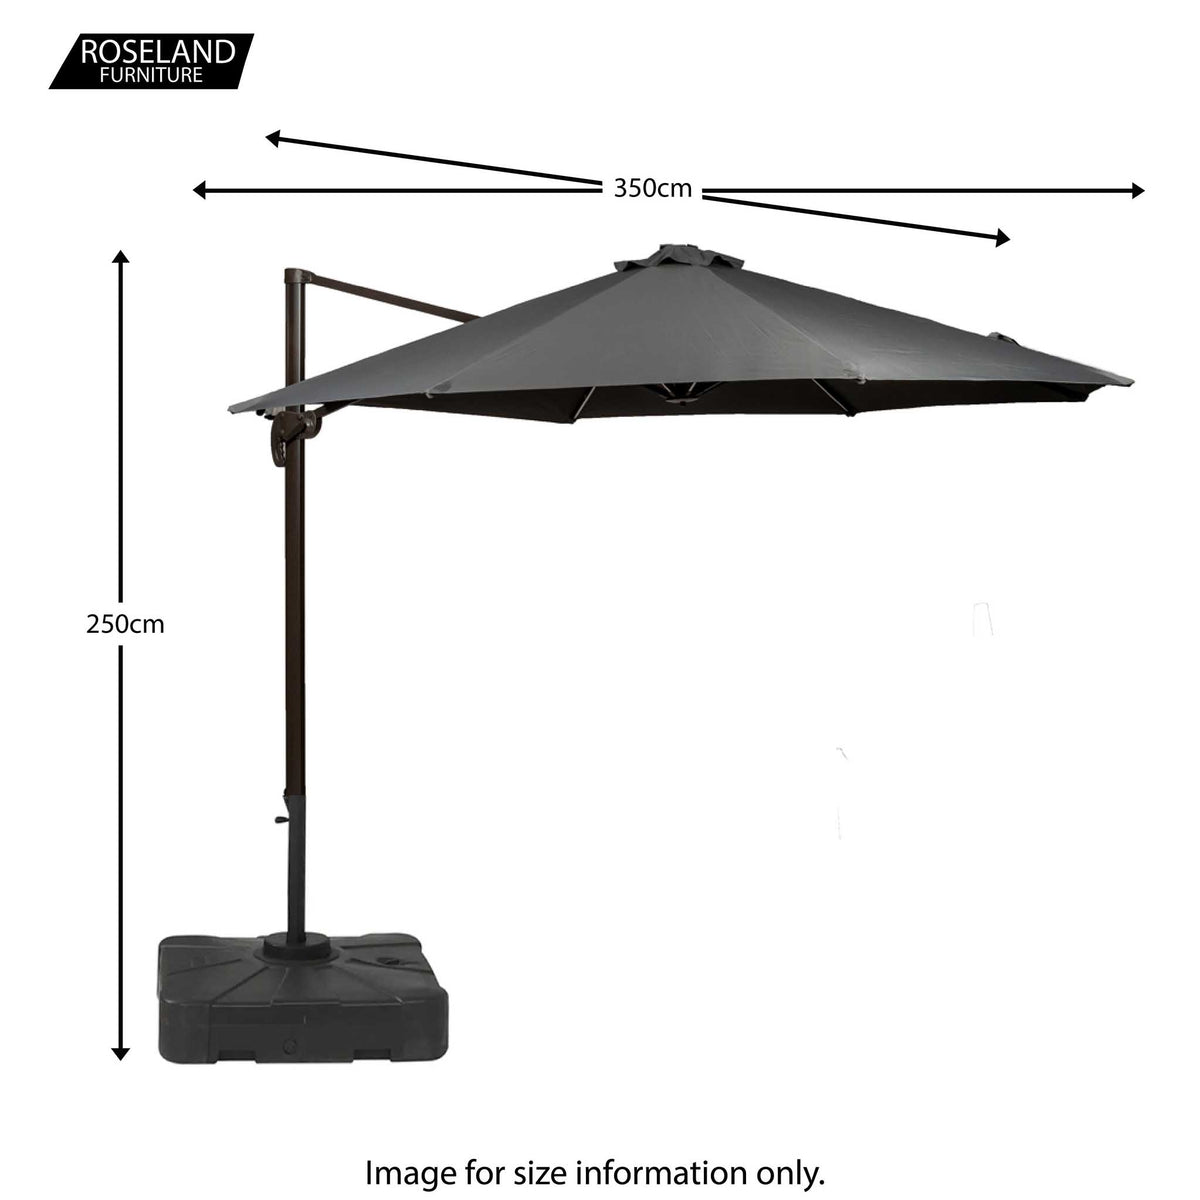 Round Deluxe Solar LED Cantilever Parasol with Base - Size Guide